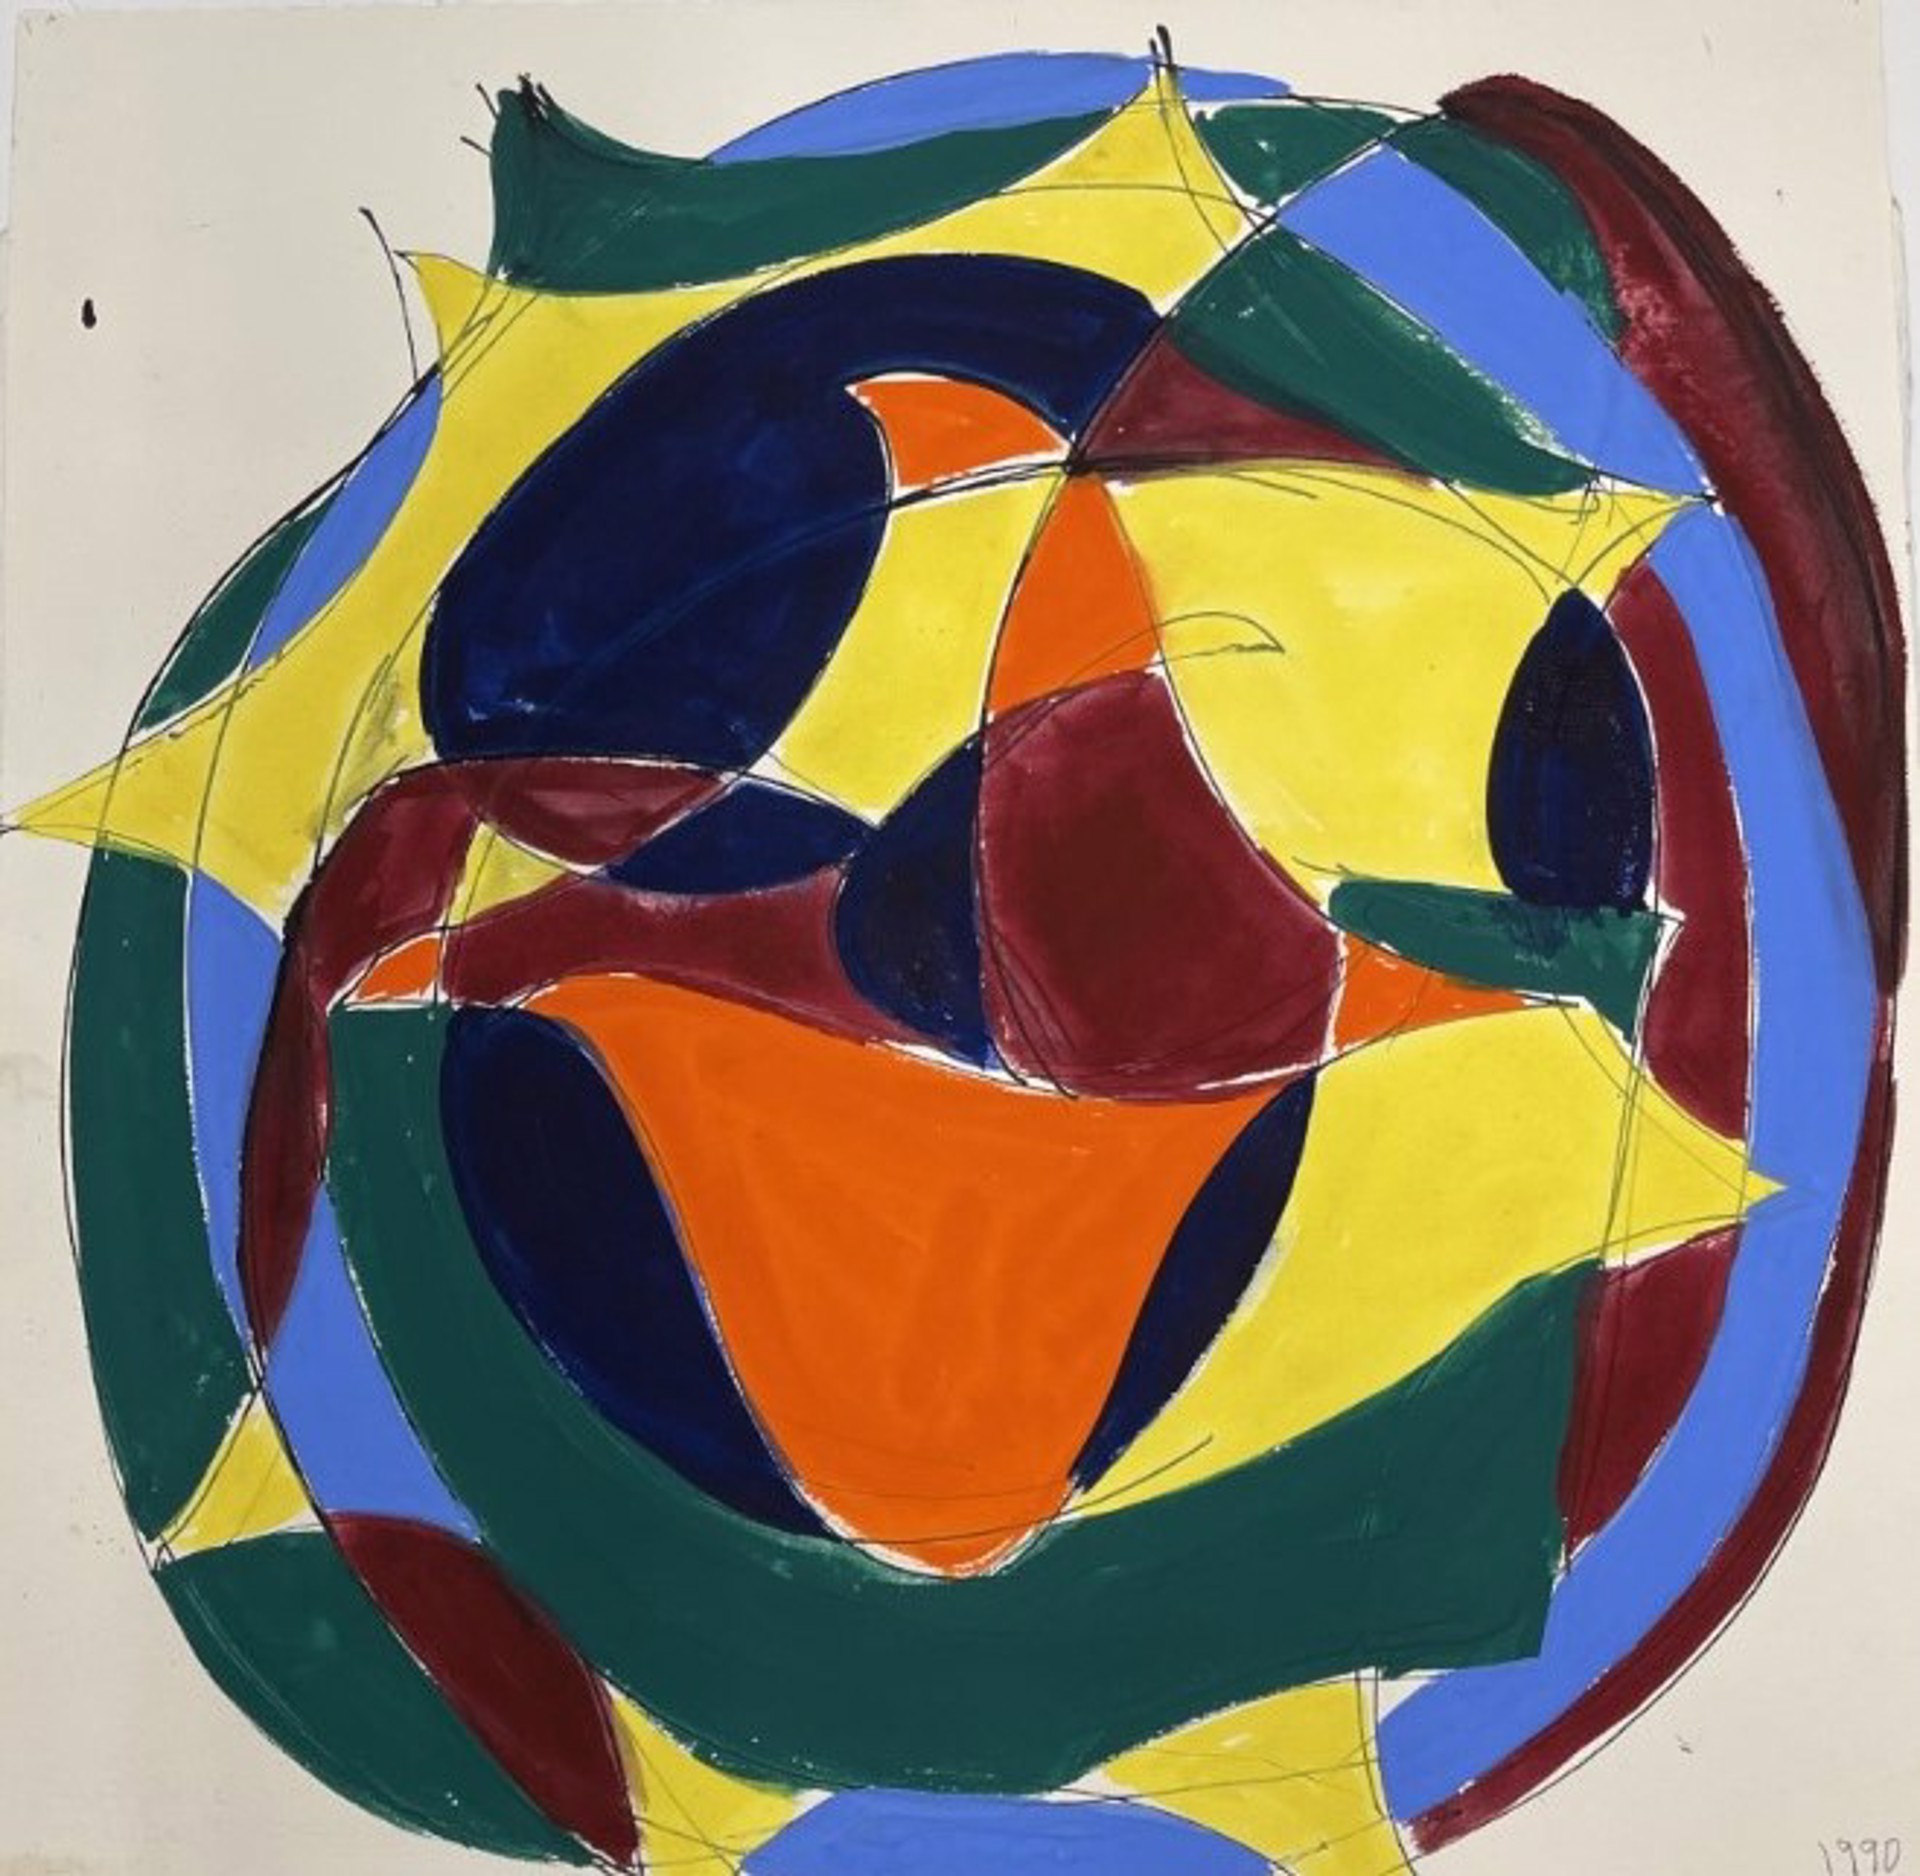 Study for Polychrome Steel Wall Relief by David Hayes (1931 - 2013)